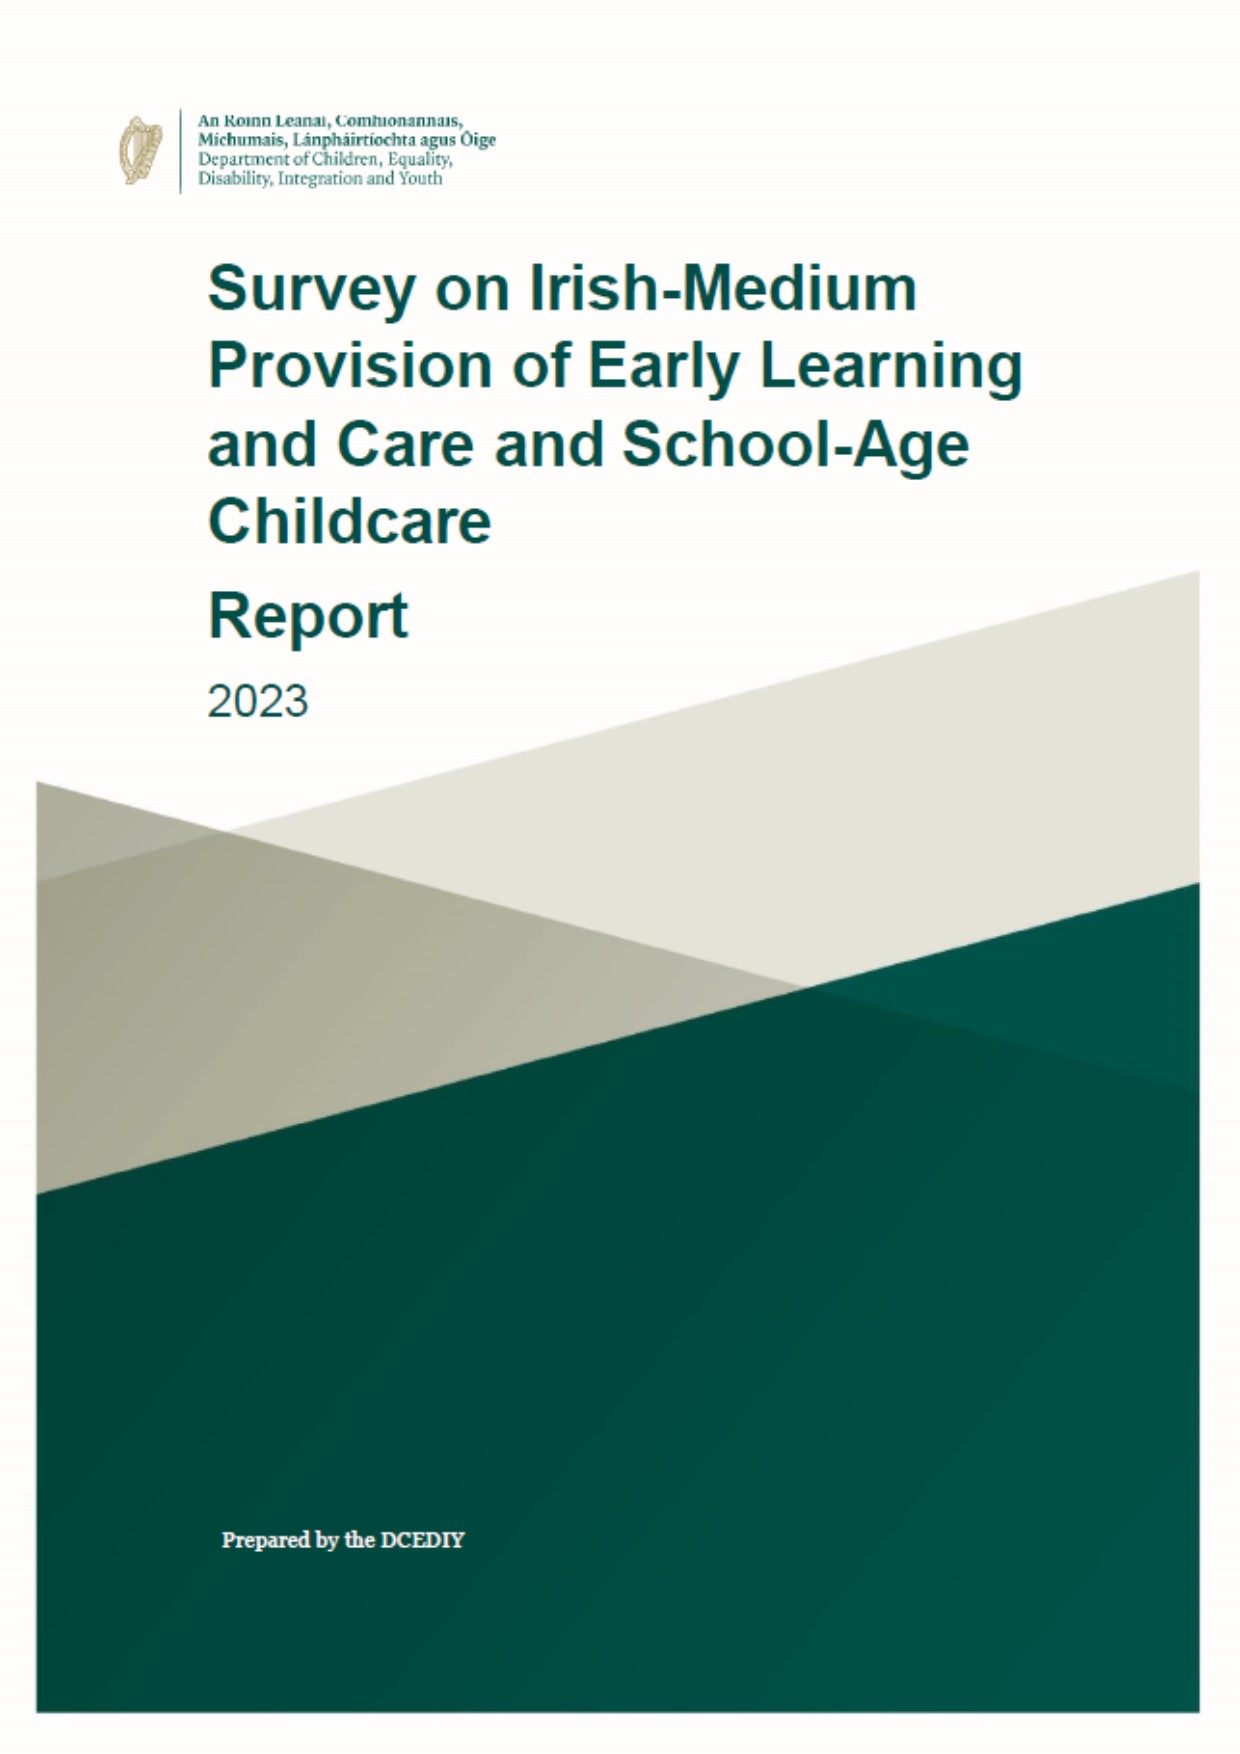 Survey on Irish Medium Provision of Early Learning and Care and School Age Childcare Report 2023